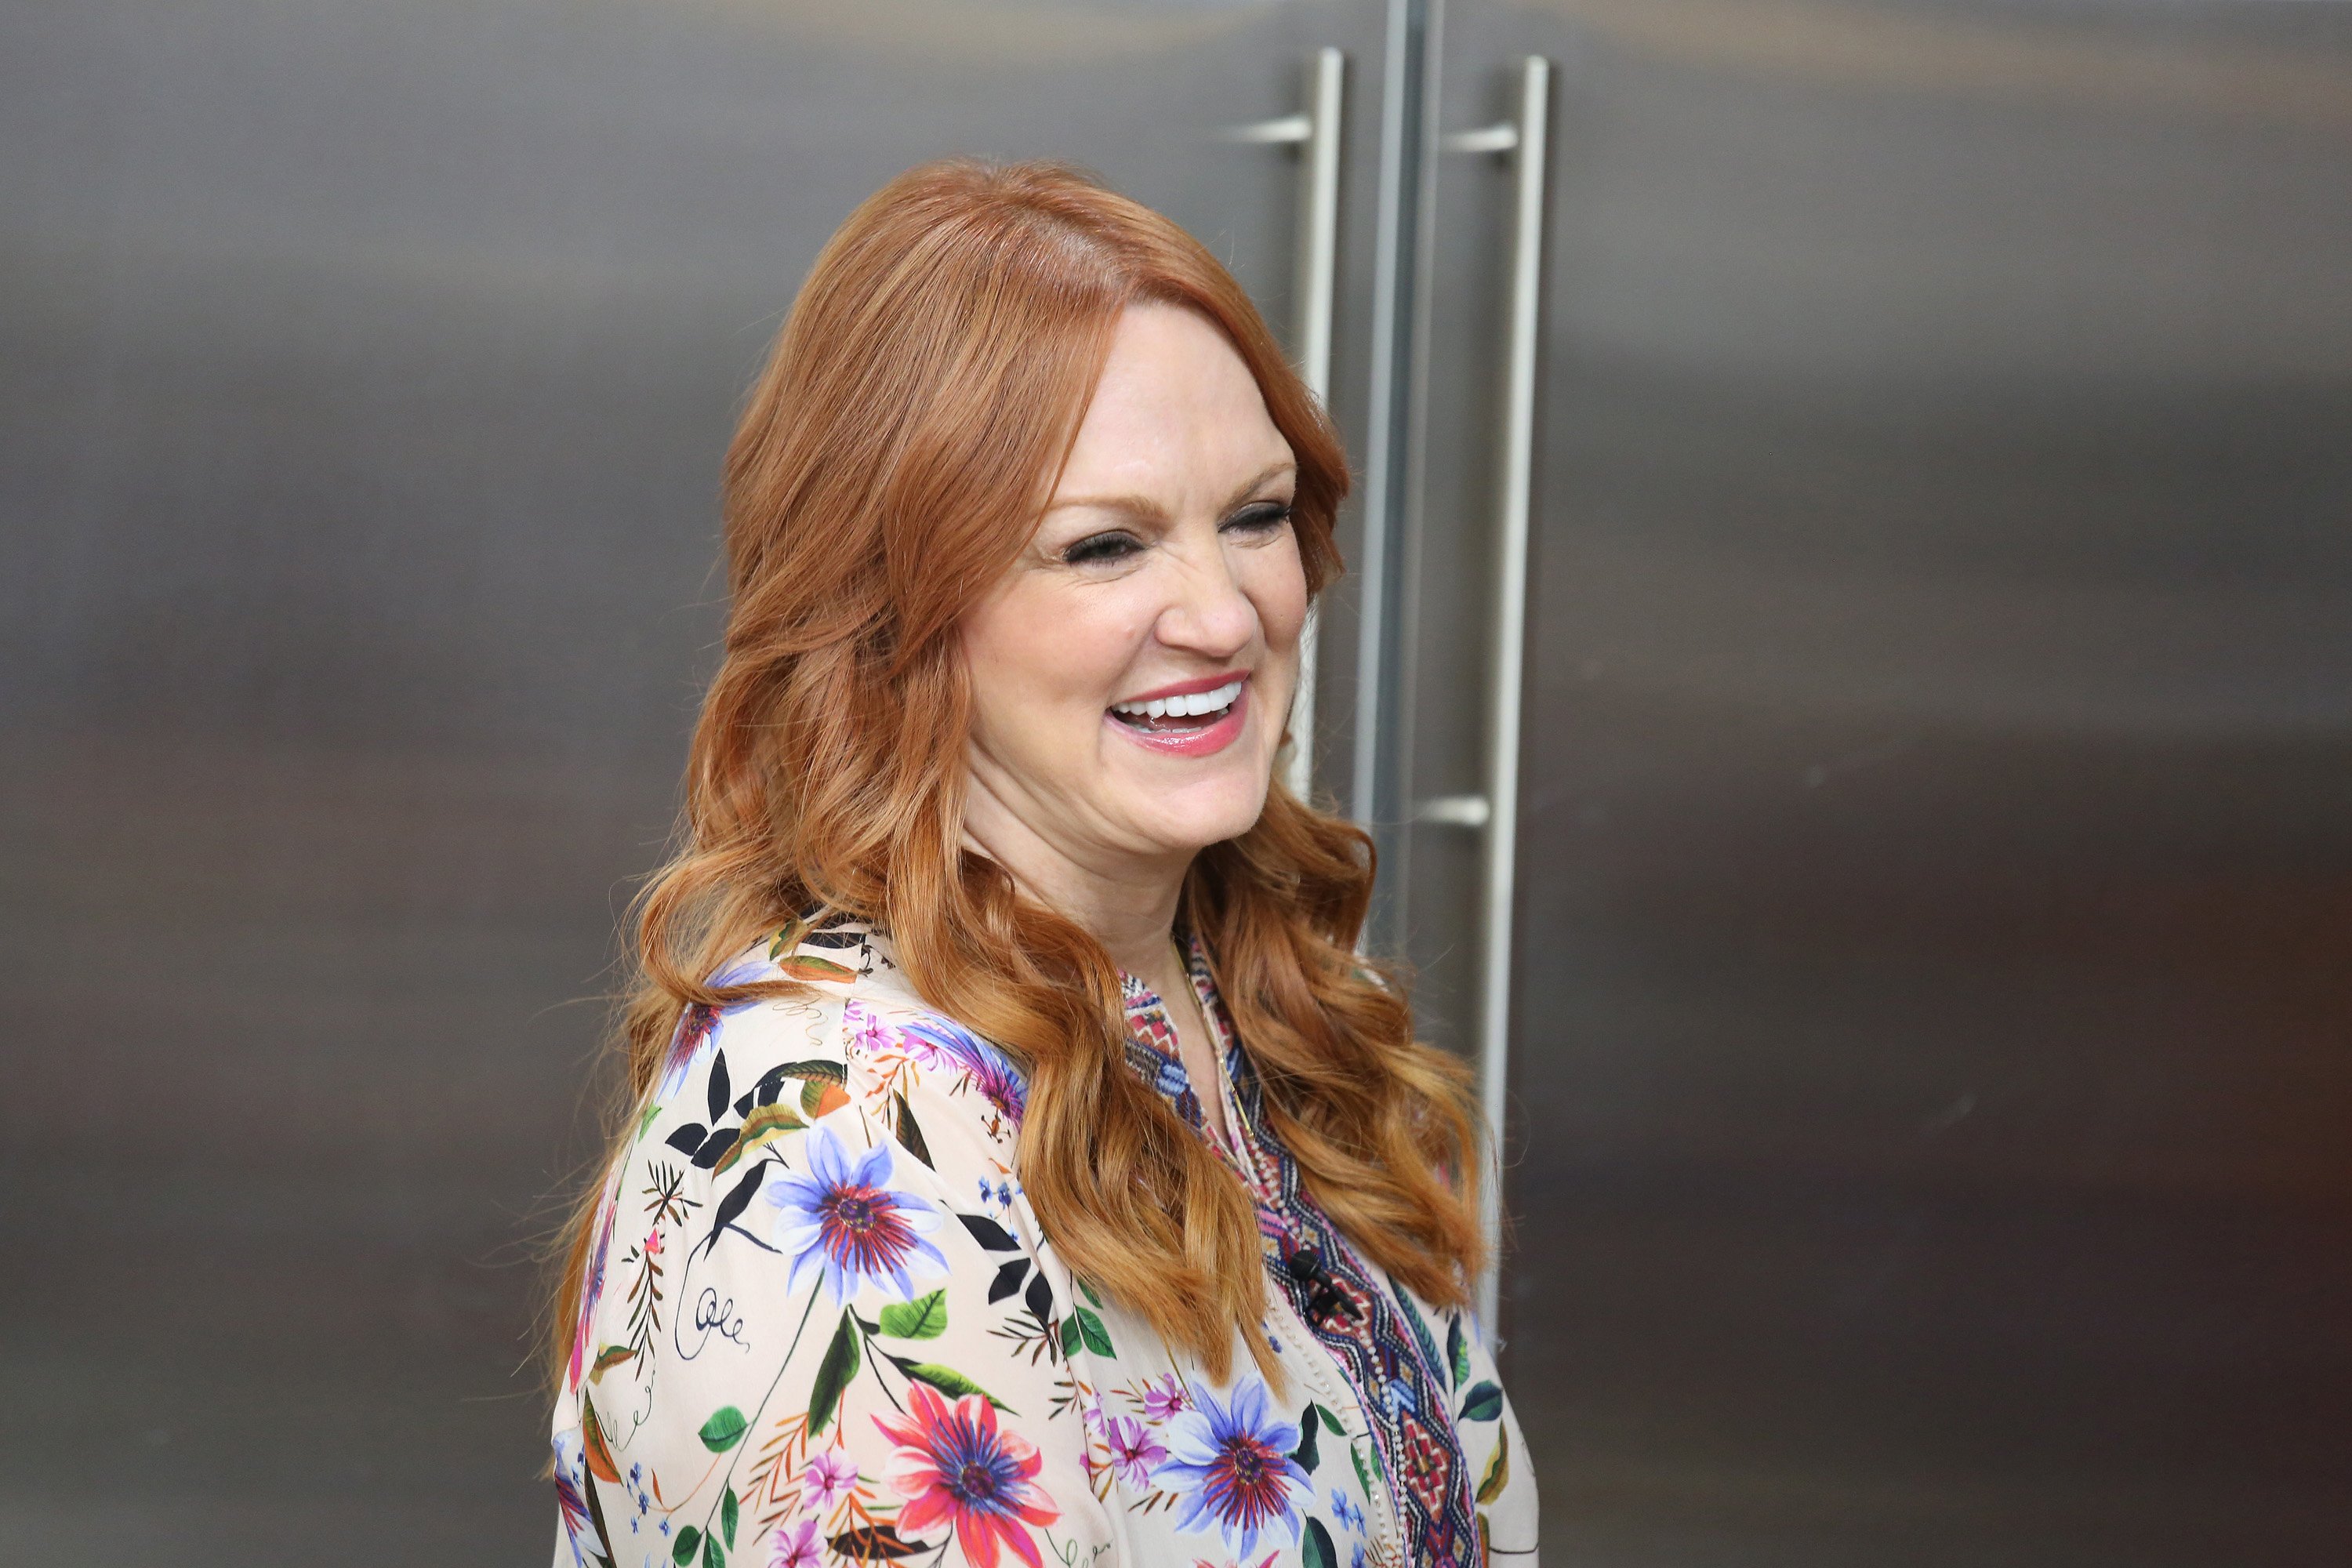 'The Pioneer Woman' star Ree Drummond is pictured in a 2019 appearance on 'Today.'